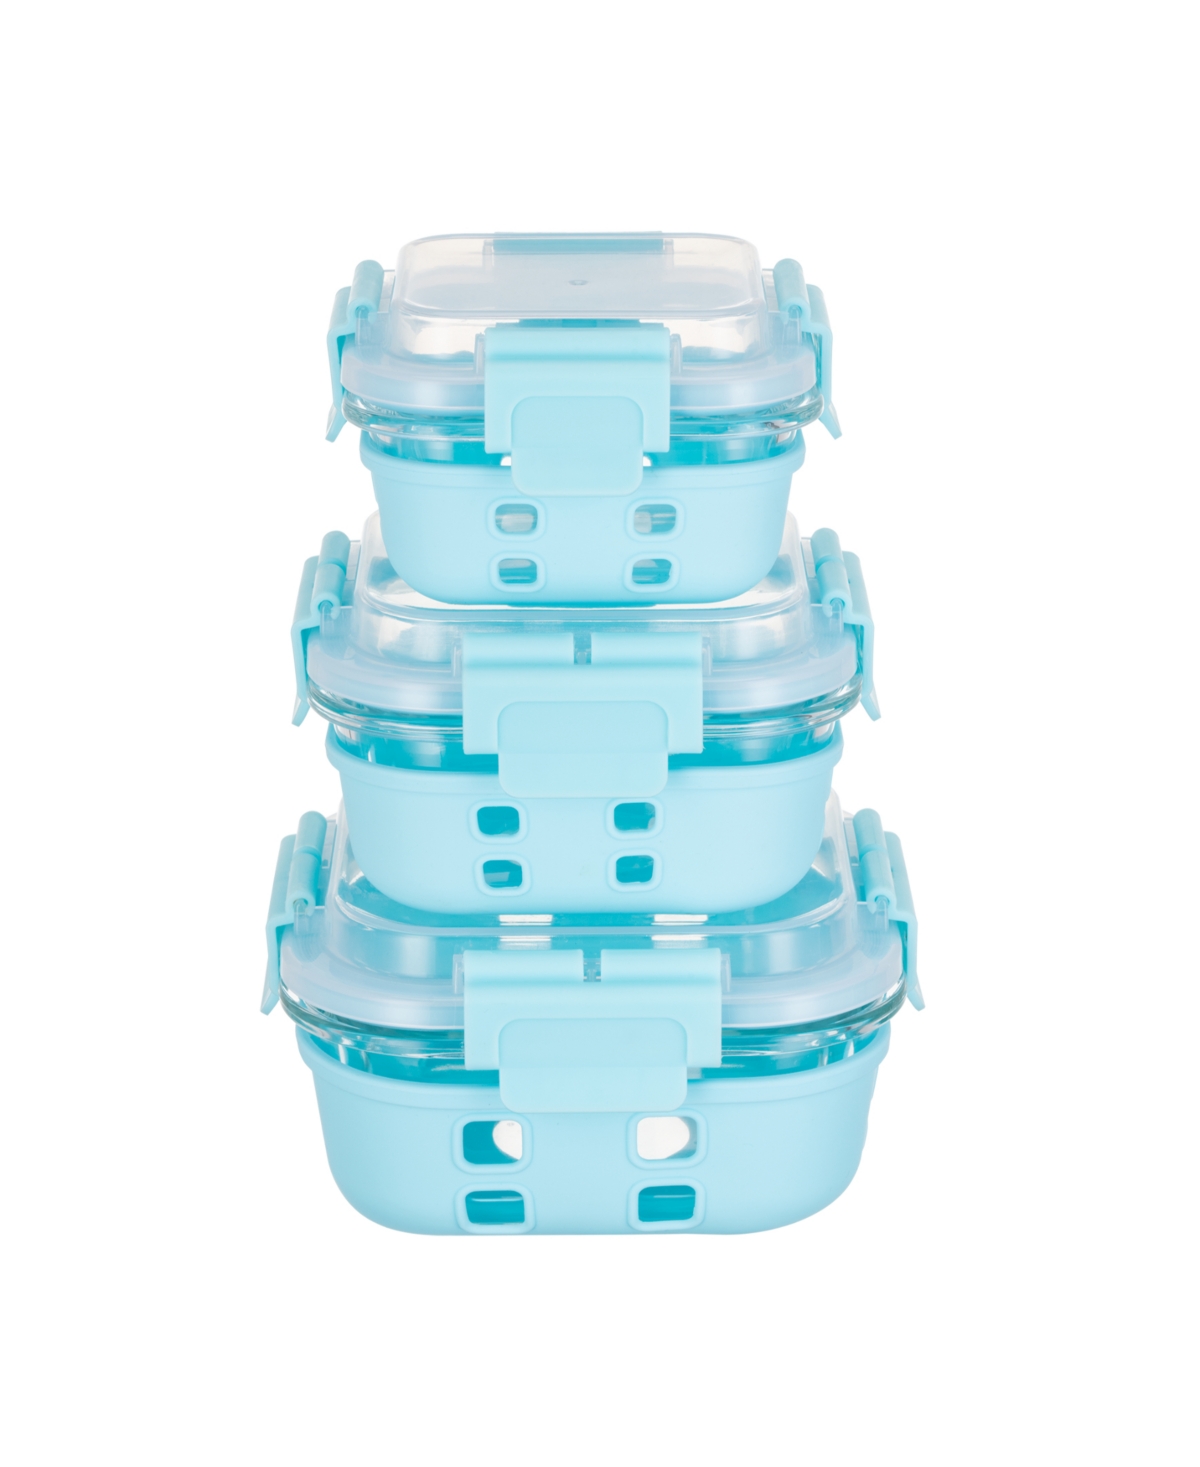 Genicook 3 Pc Square Container Hi-top Lids With Pro Grade Removable Lockdown Levers Silicone Sleeve Set In Aqua Blue